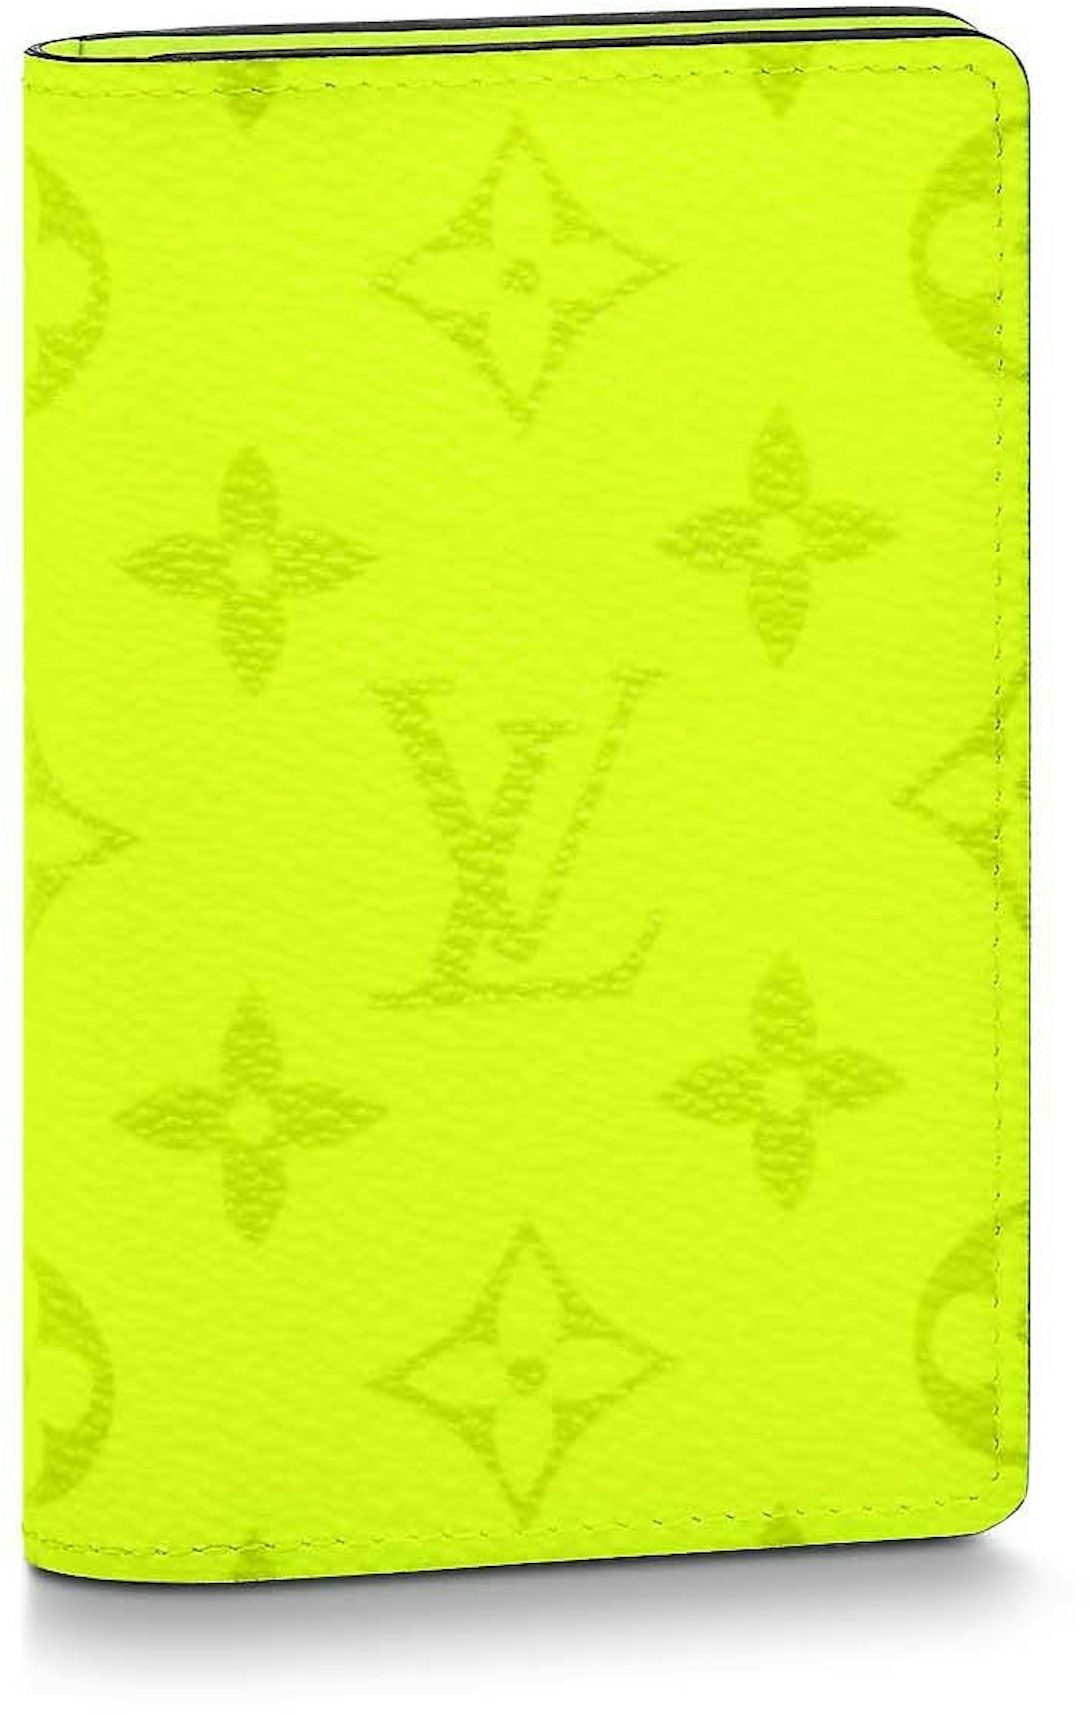 Louis Vuitton Pocket Organizer Neon Yellow in Monogram Coated Canvas/Taiga  Cowhide Leather - US